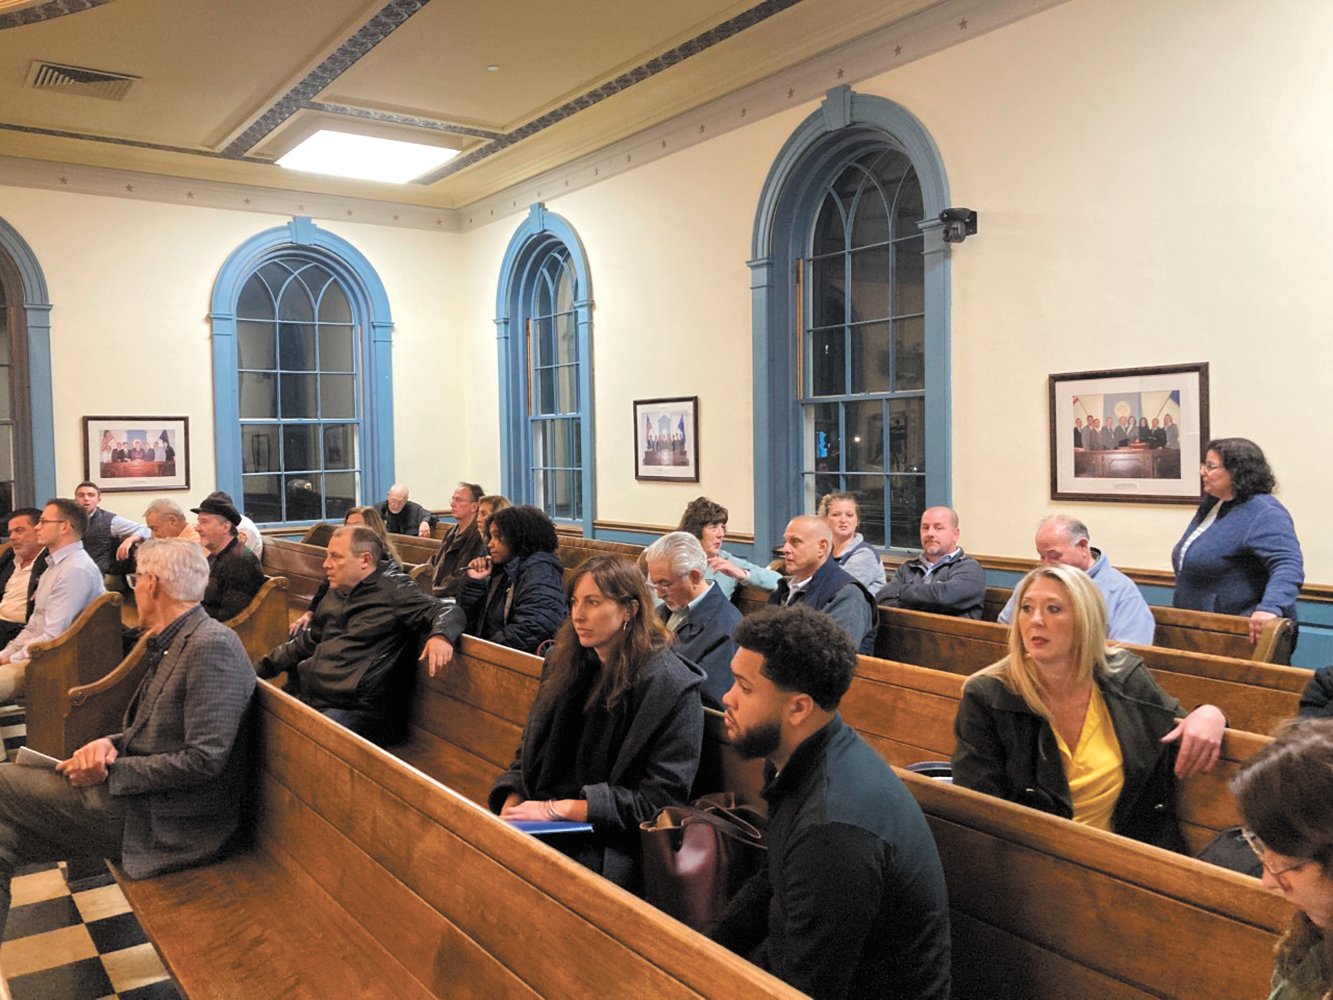 FILING IN: Residents came to City Council chambers Thursday night to discuss the resolution on pallet shelters that was sponsored by Councilman Matthew Reilly and Councilwoman Nicole Renzulli. The resolution called for Gov. Dan McKee to abandon plans for placing pallet shelters at Cranston’s Pastore Center. (Herald photo)